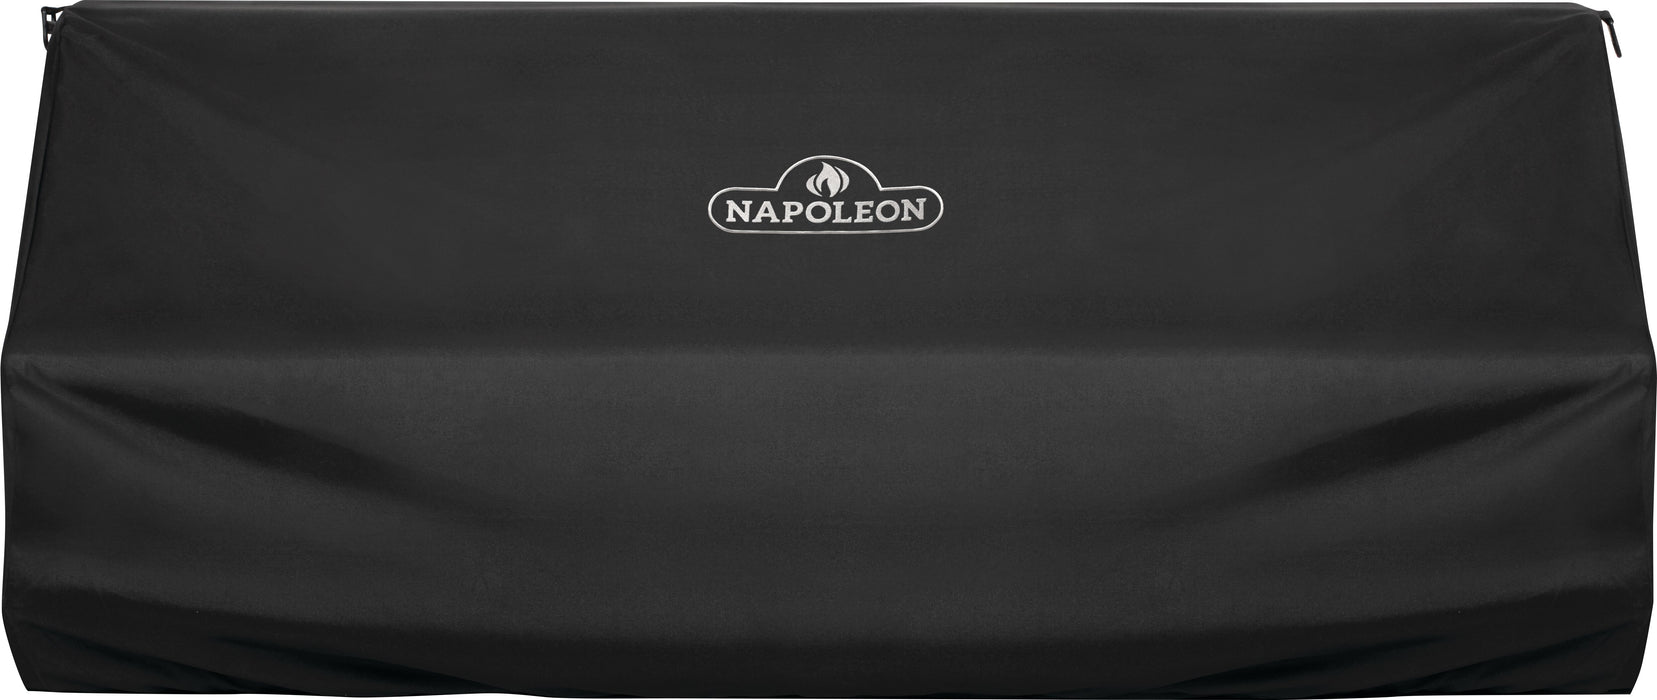 Napoleon 61826 PRO 825 Built-In Grill Cover